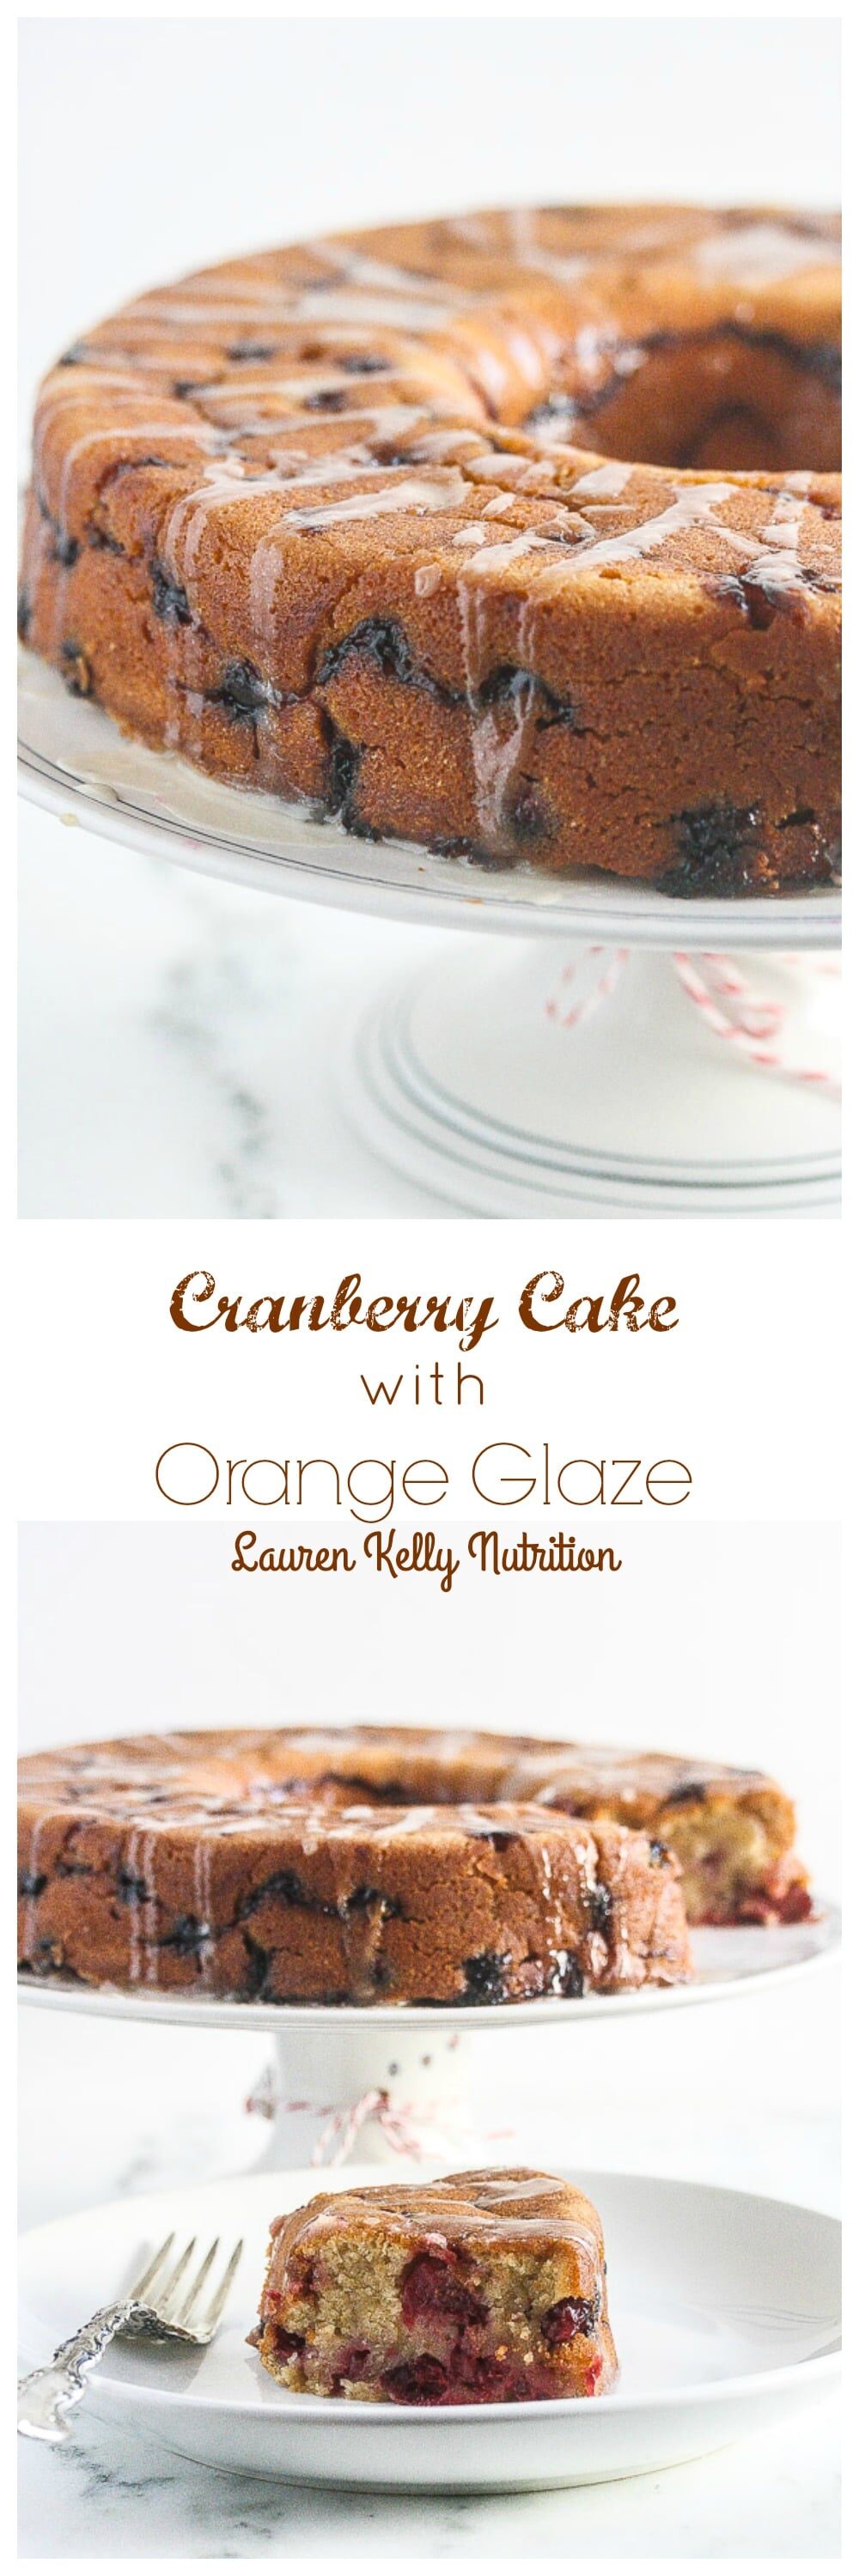 This Cranberry Cake with Orange Glaze is lightened up a bit, but still crazy delicious! 